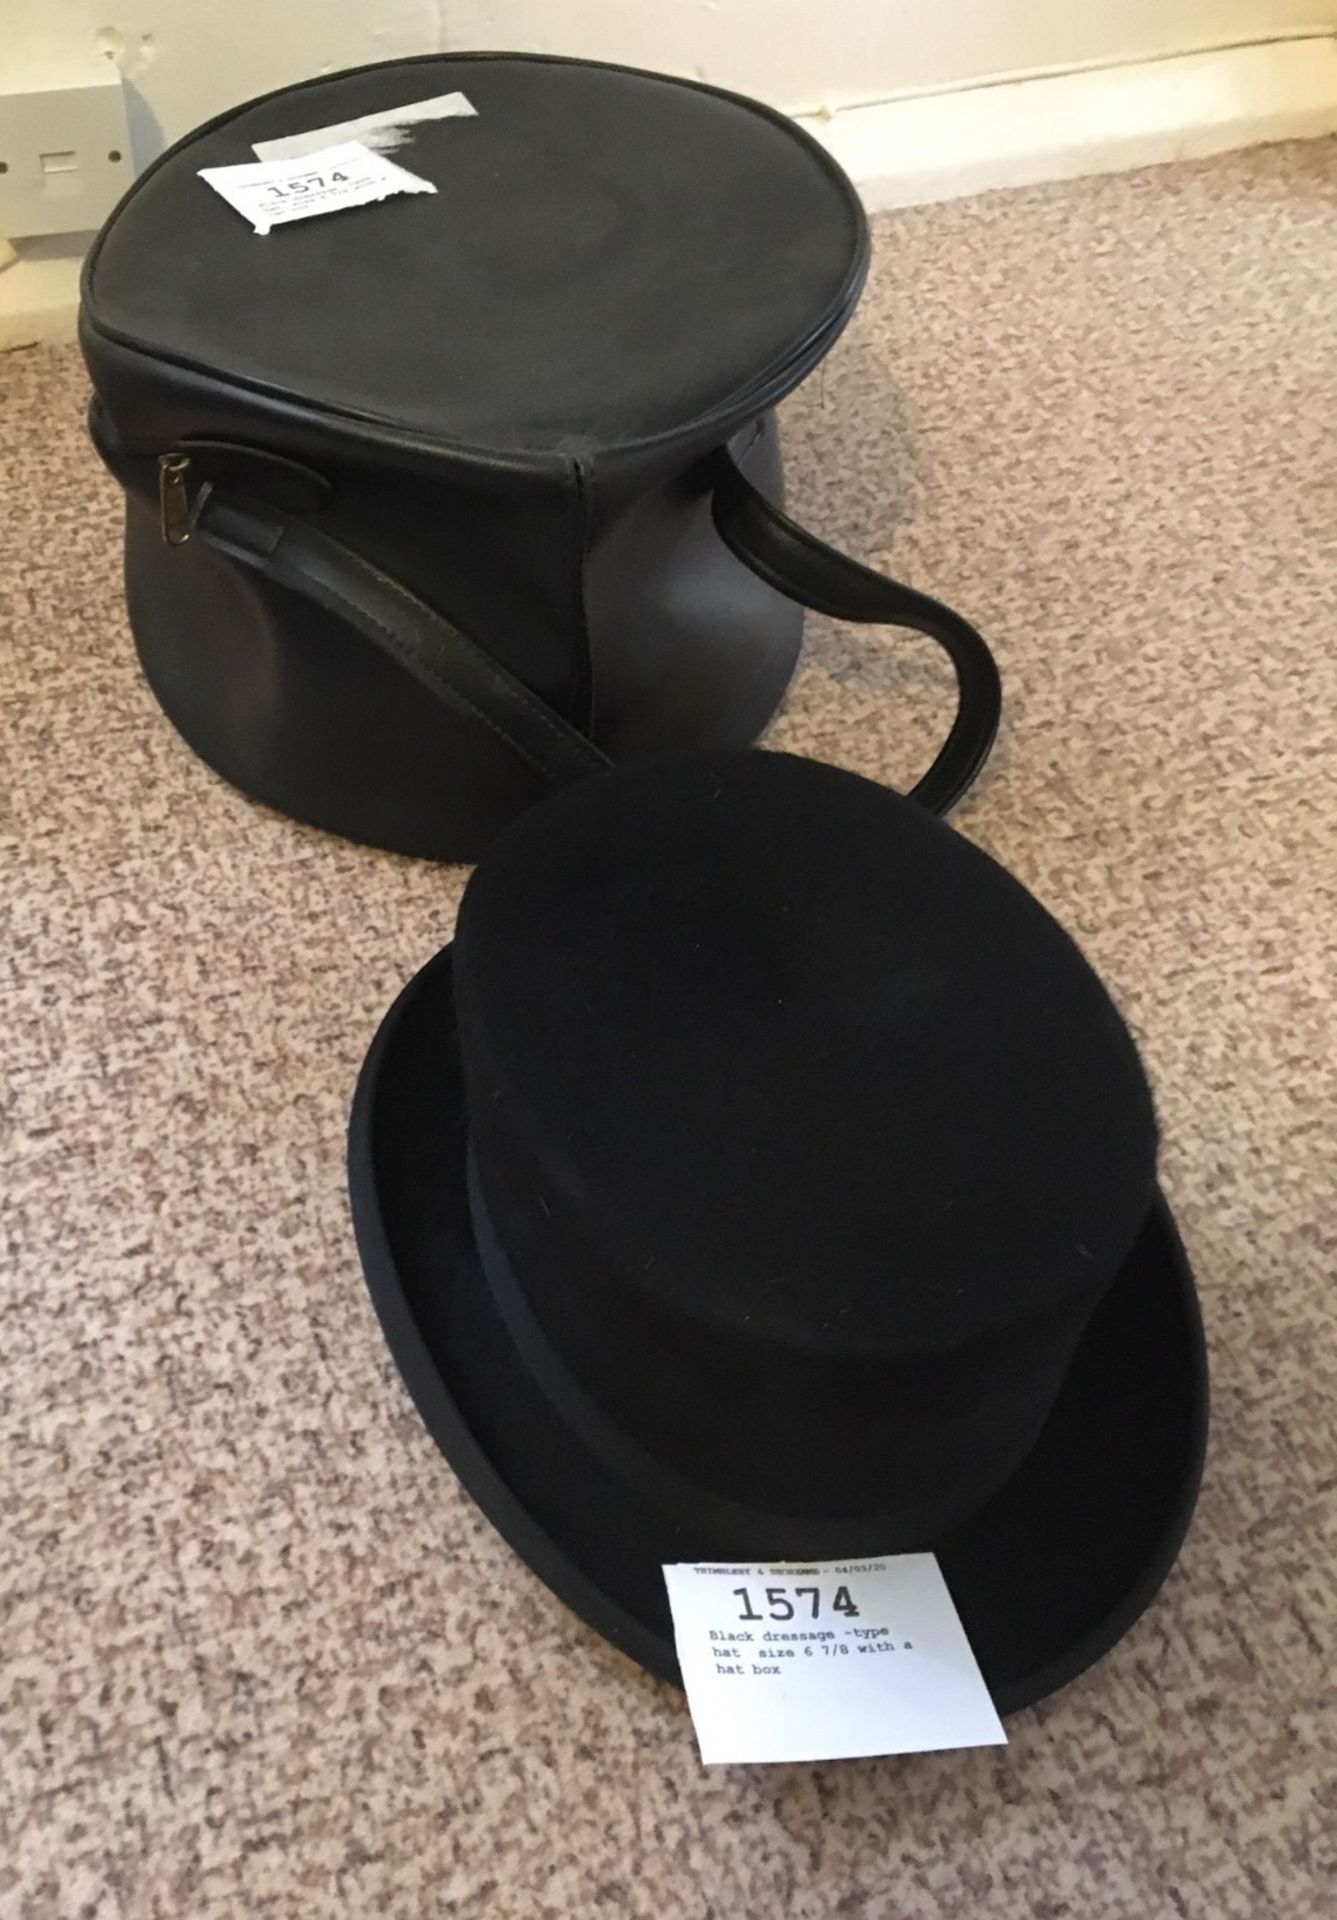 Black dressage -type hat, size 6 7/8 with a hat box